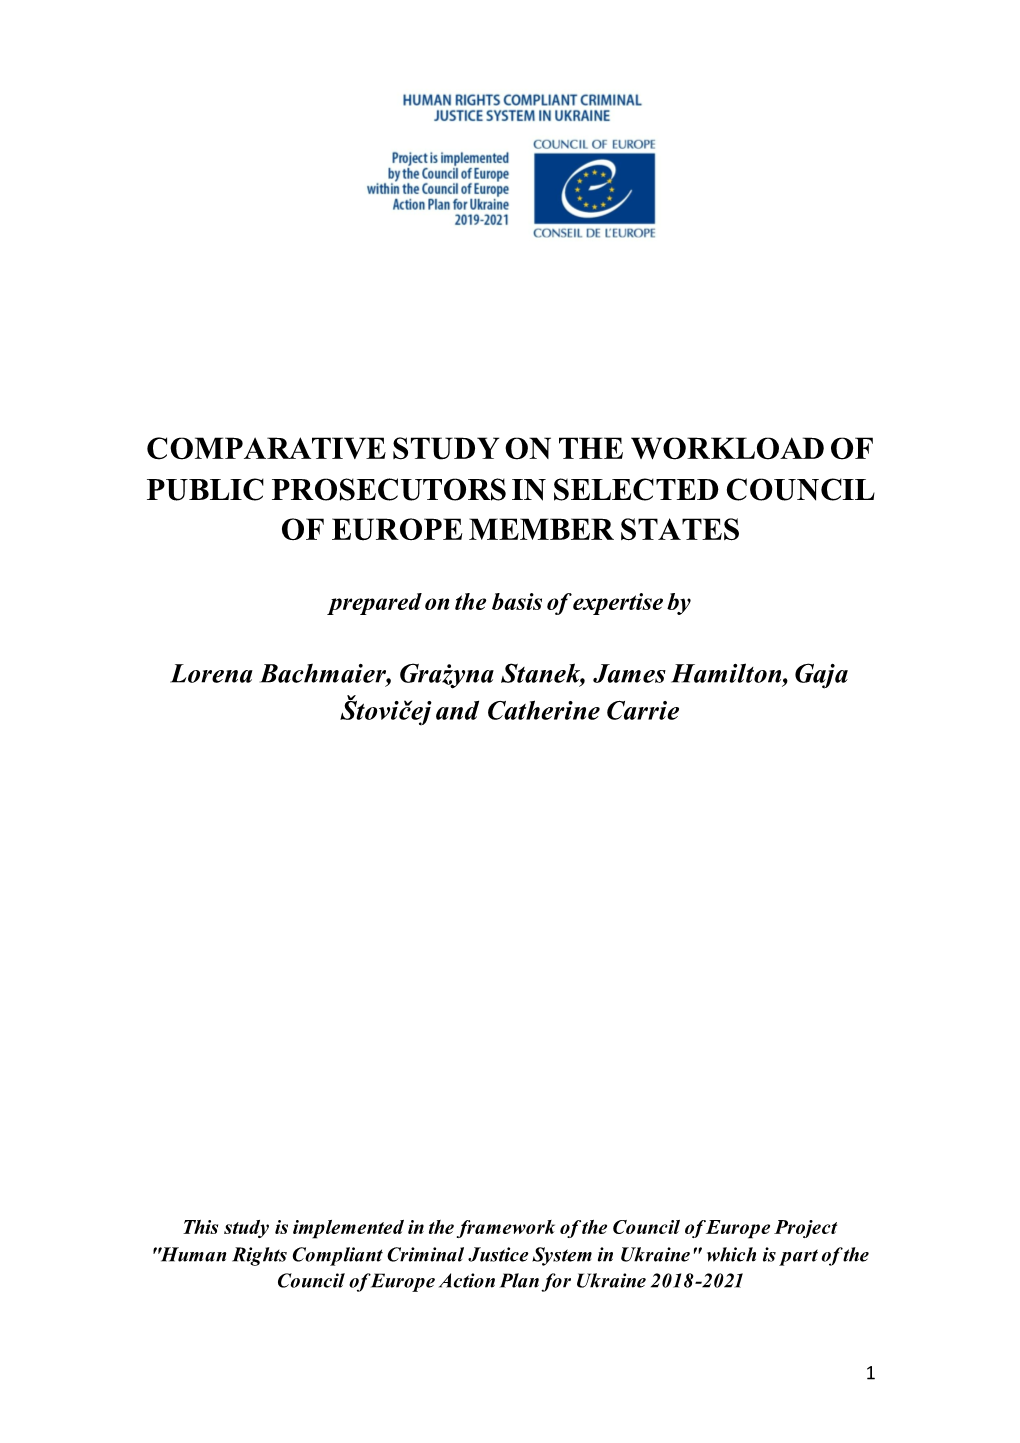 Comparative Study on the Workload of Public Prosecutors in Selected Council of Europe Member States